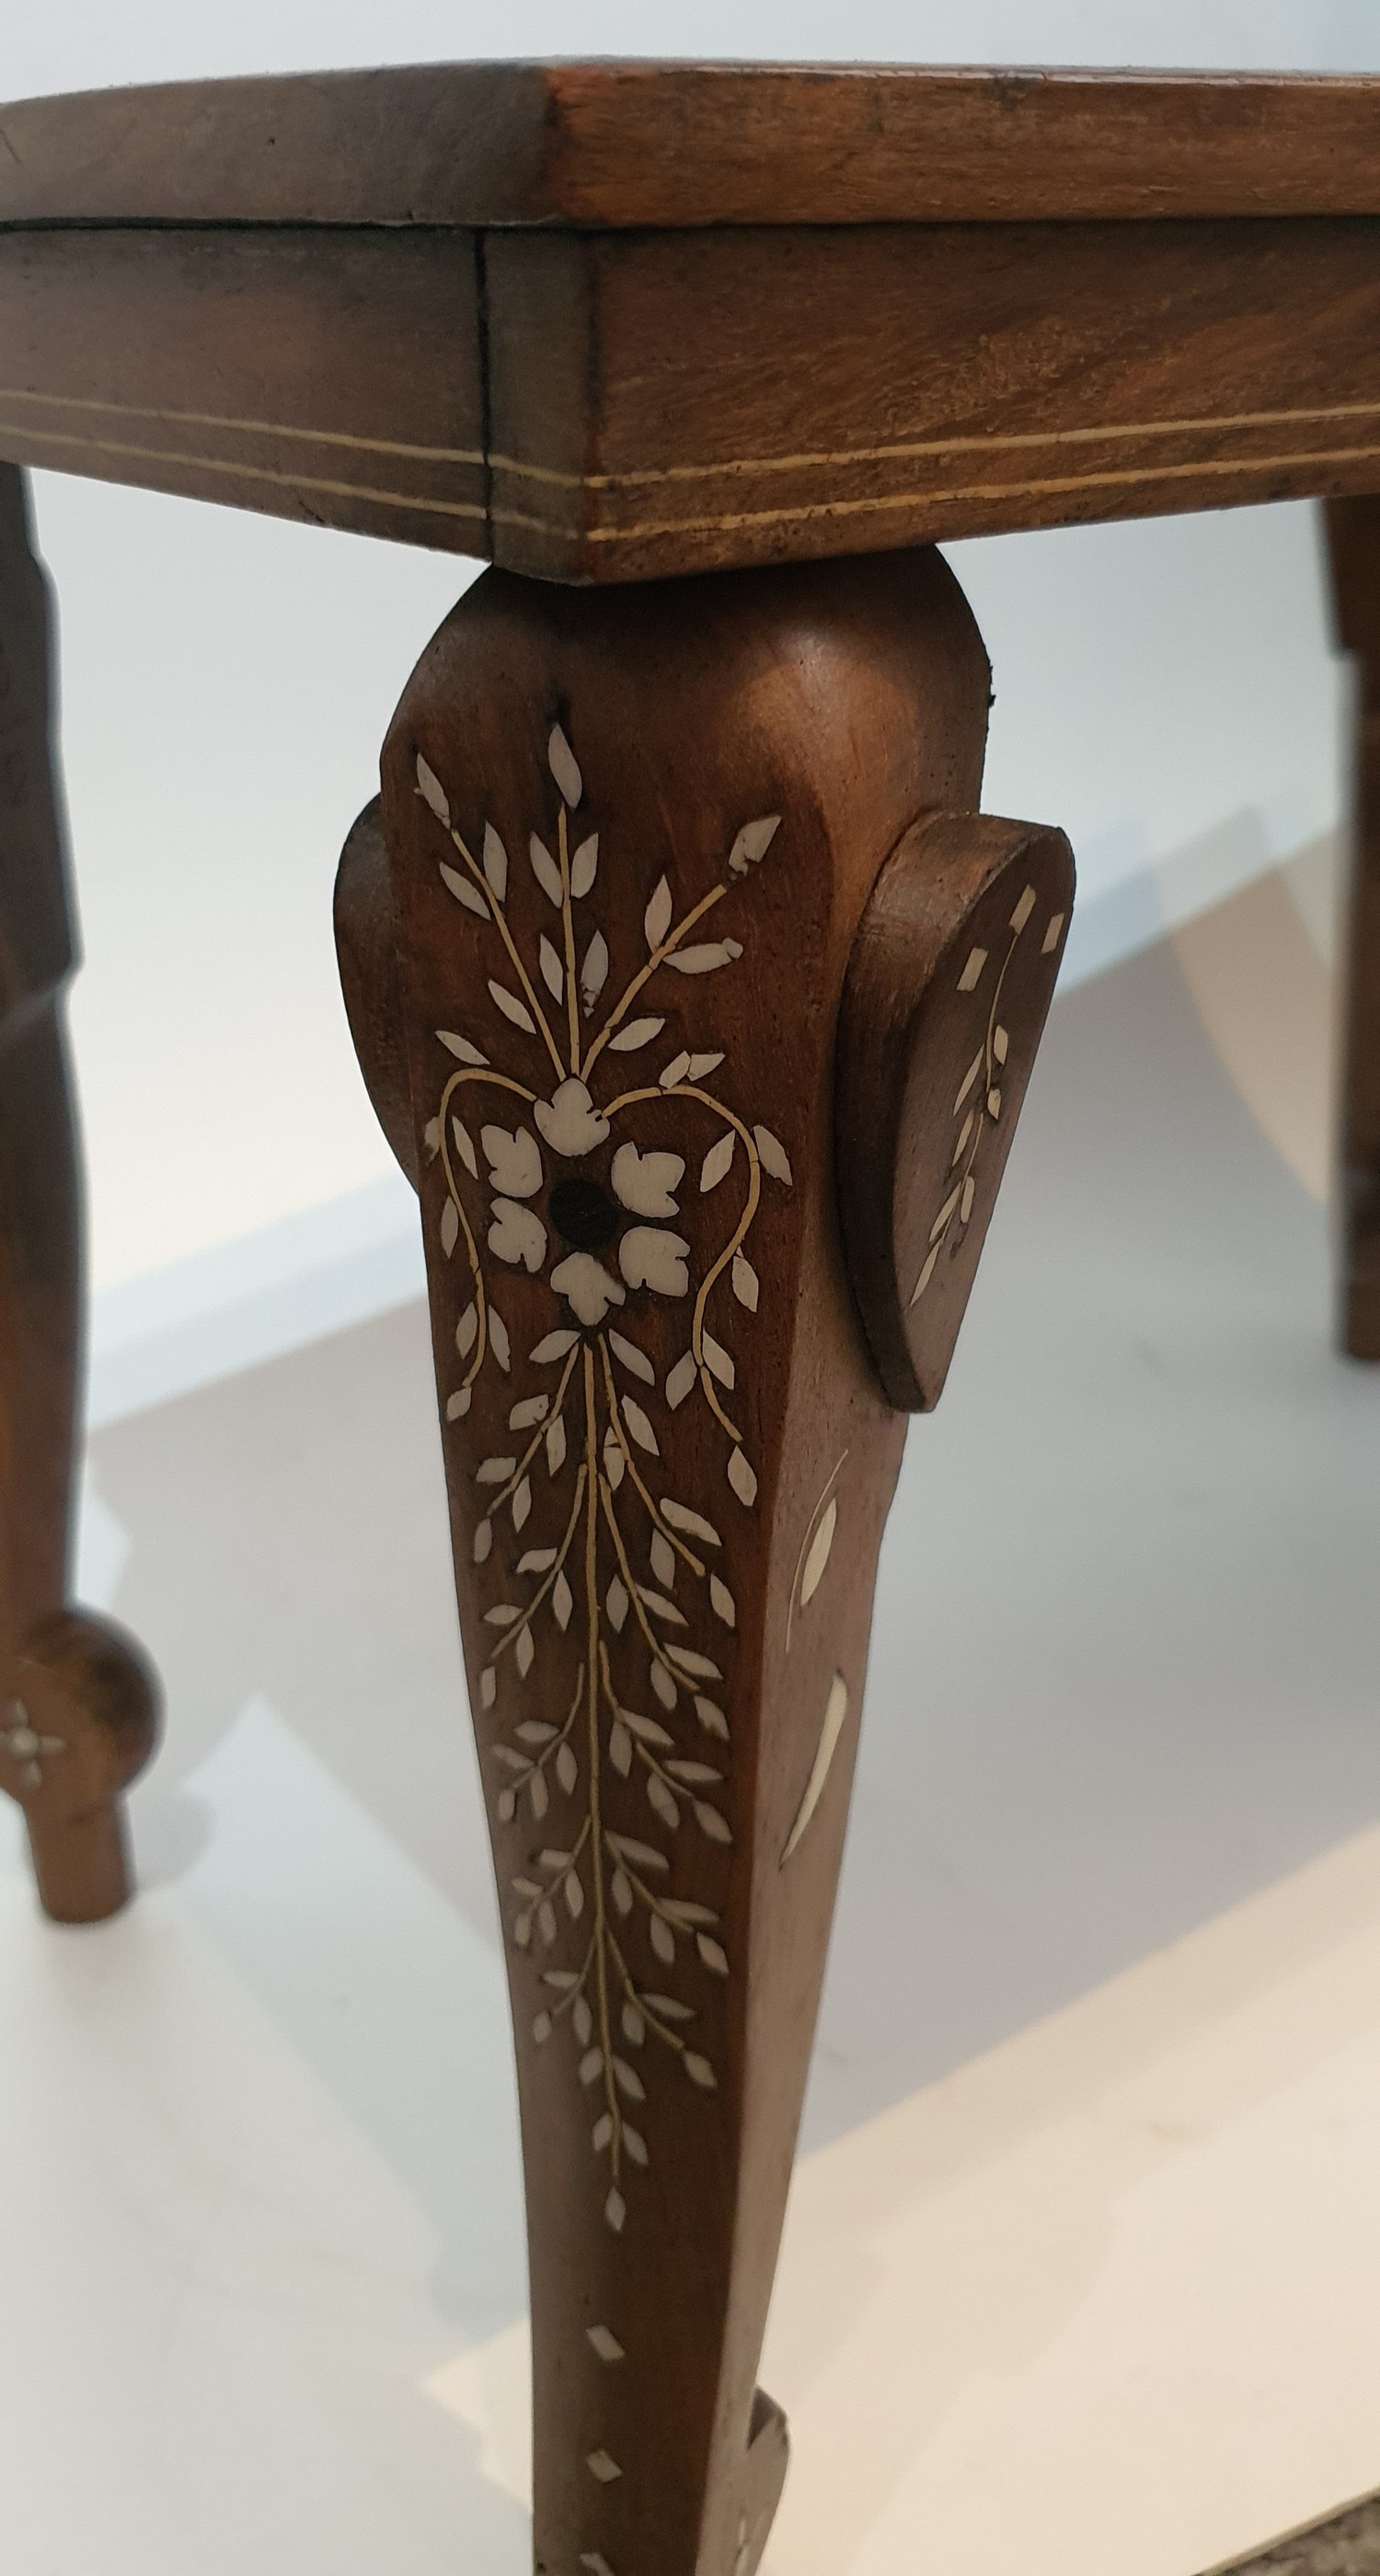 An antique Indian side table inlaid with with ivory on elephant head shape supports. The table has a - Image 5 of 5